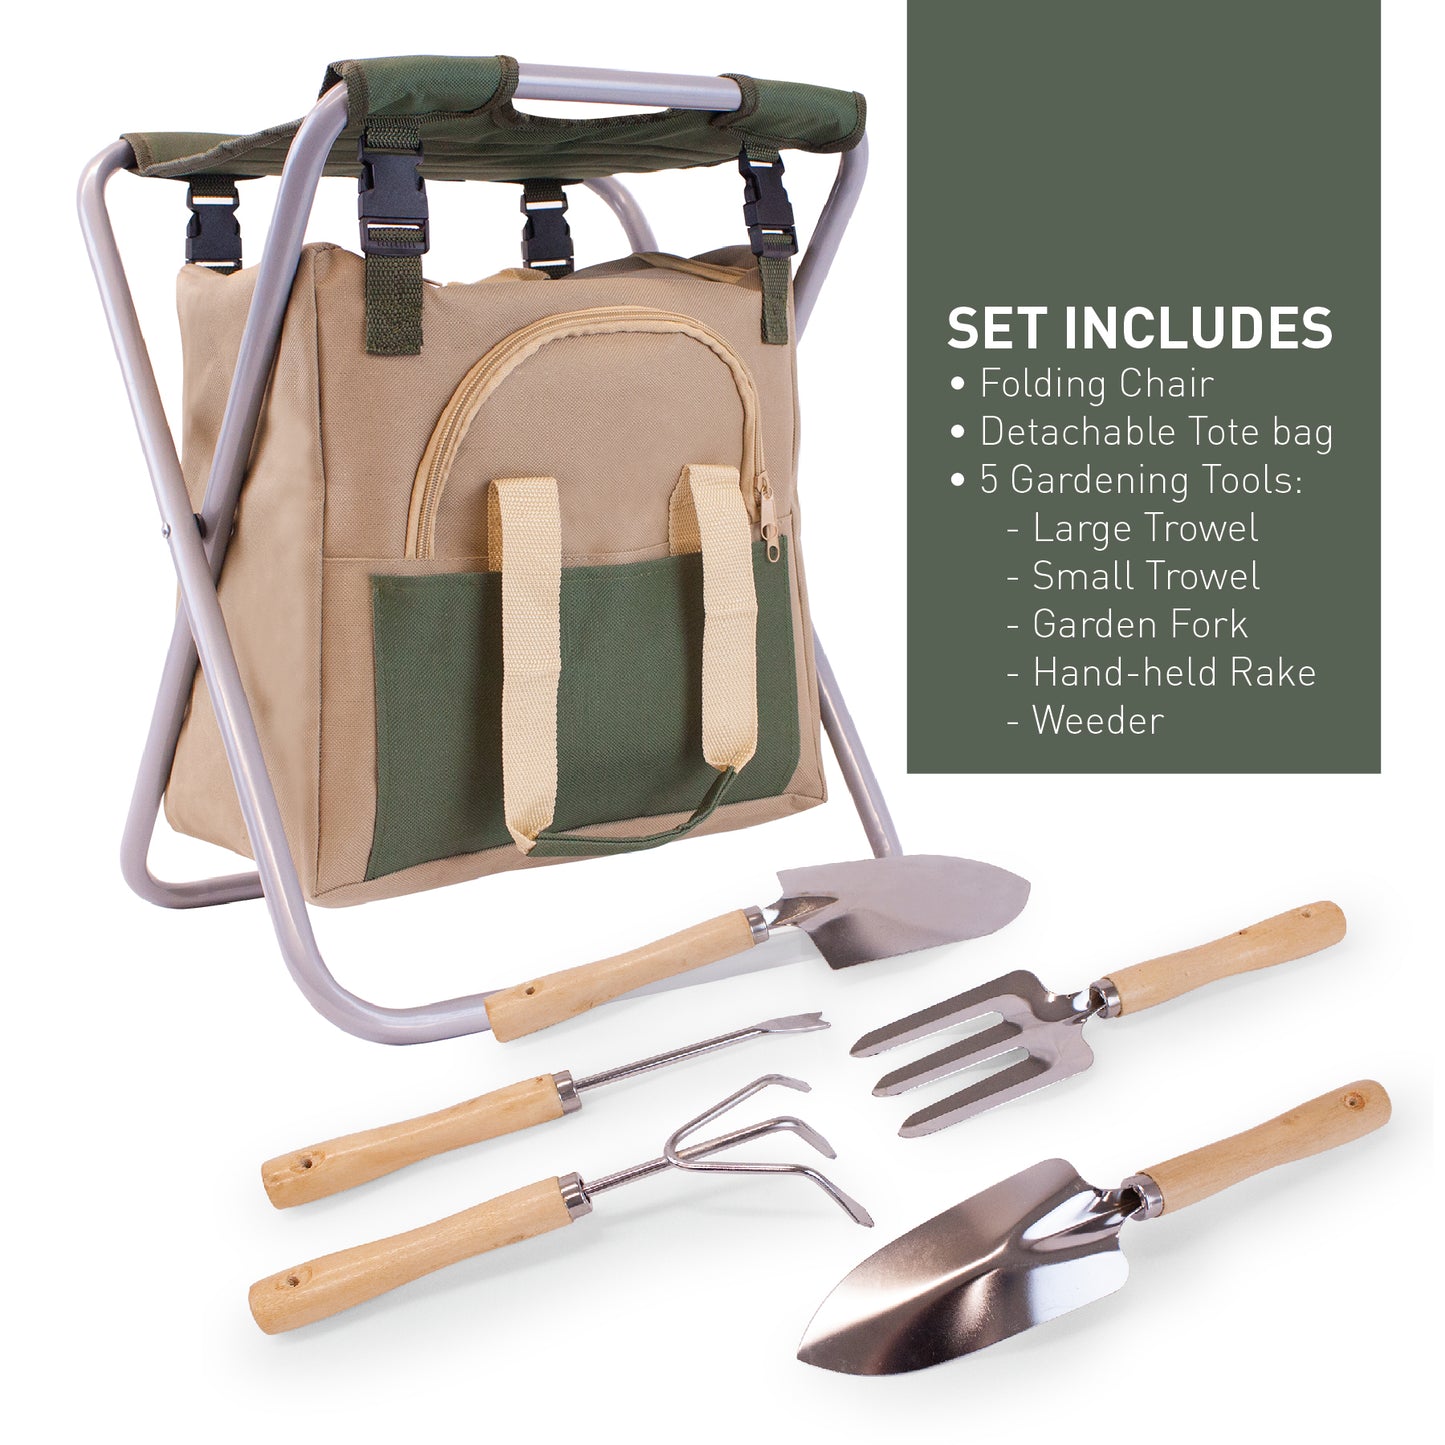 LifeStyle Products 6 pc Garden Set